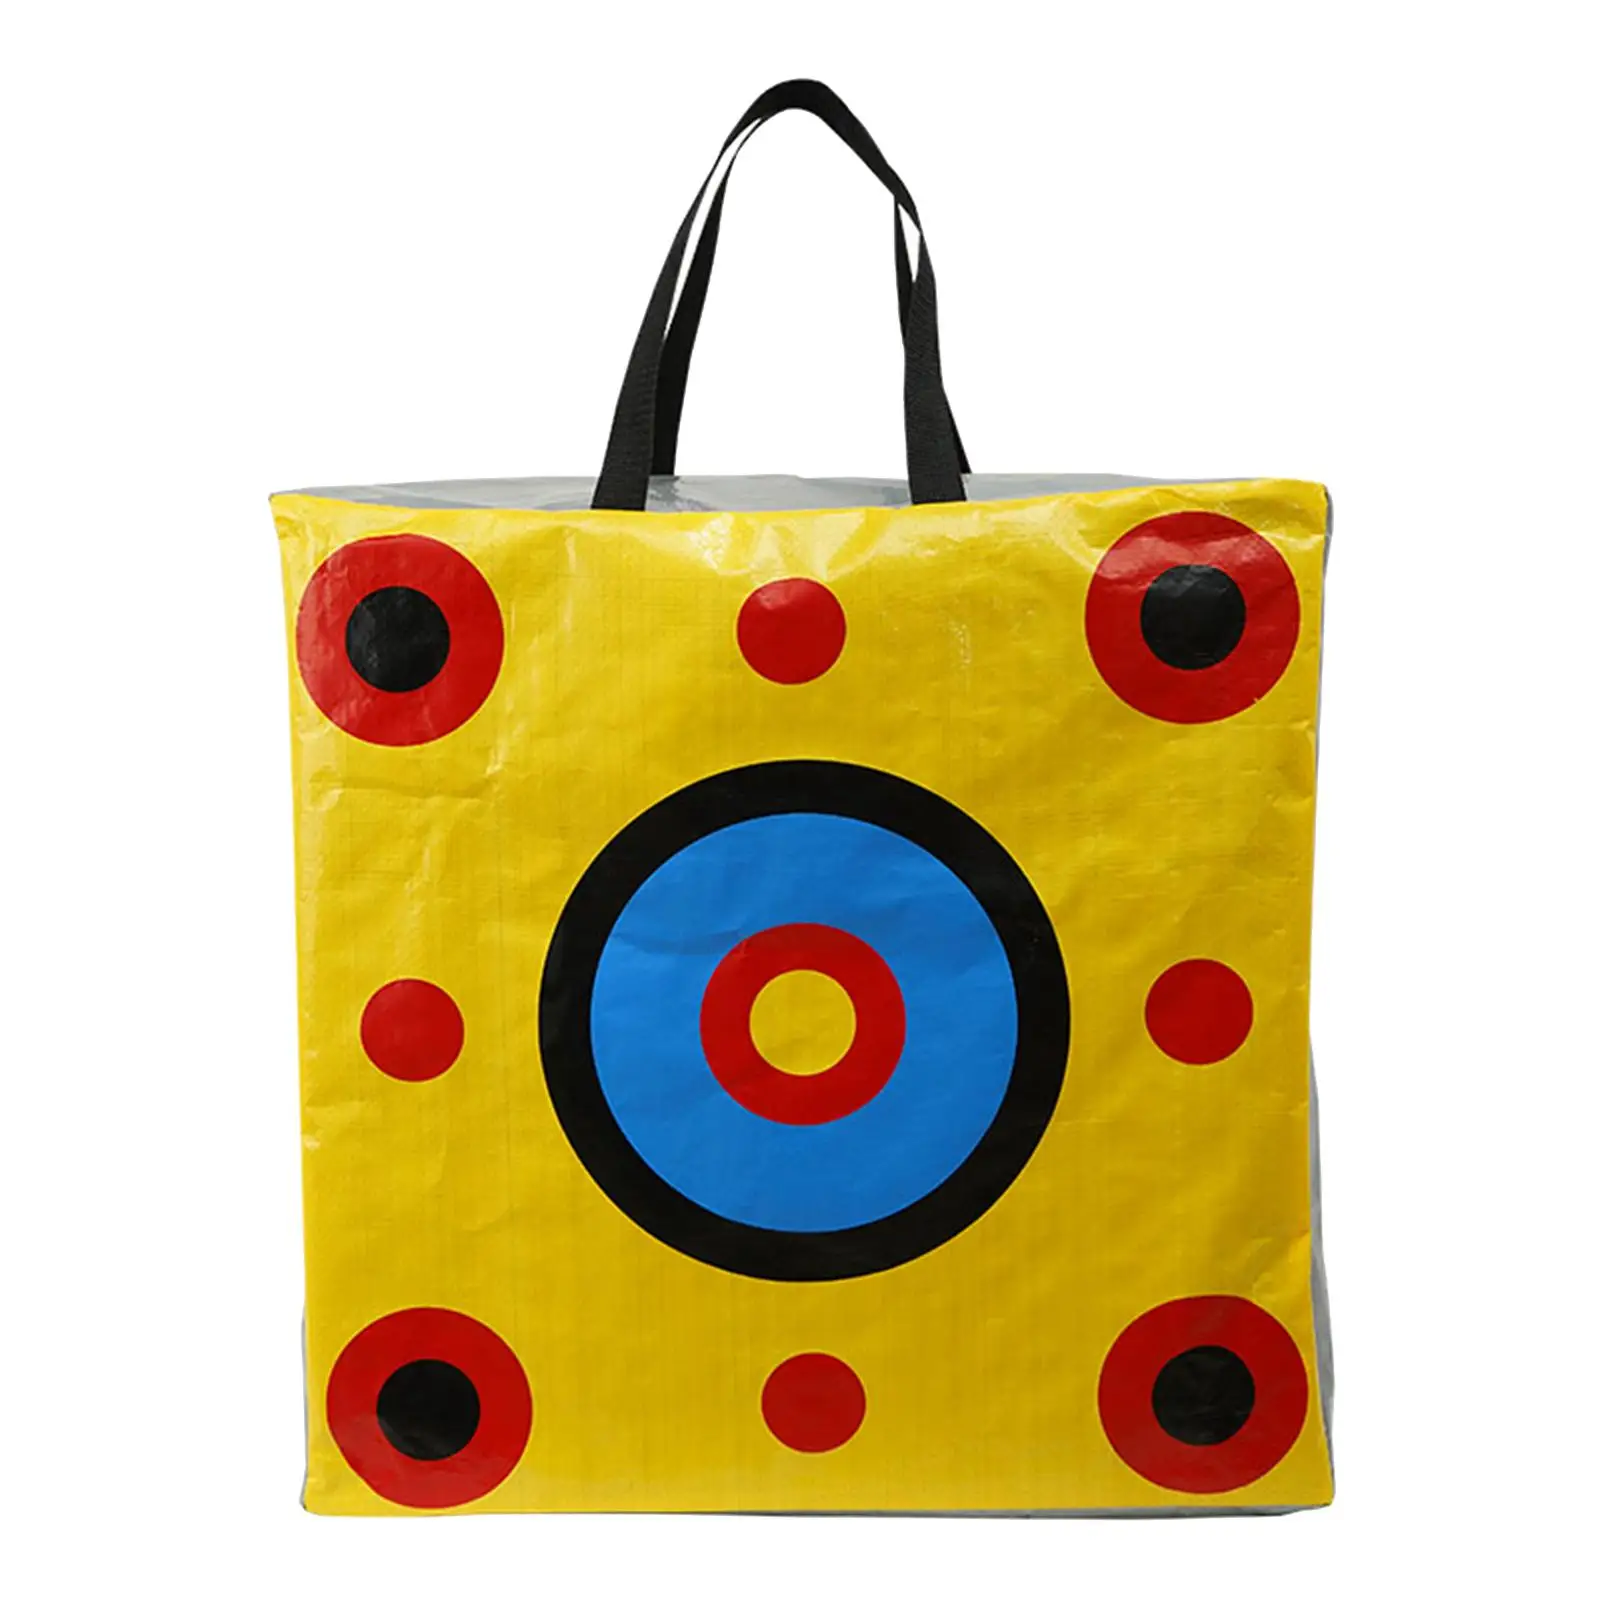 Range Targets with Carrying Handle Field Point Bag Archery Target Moving Targets Shooting Targets for Training Sports Practice